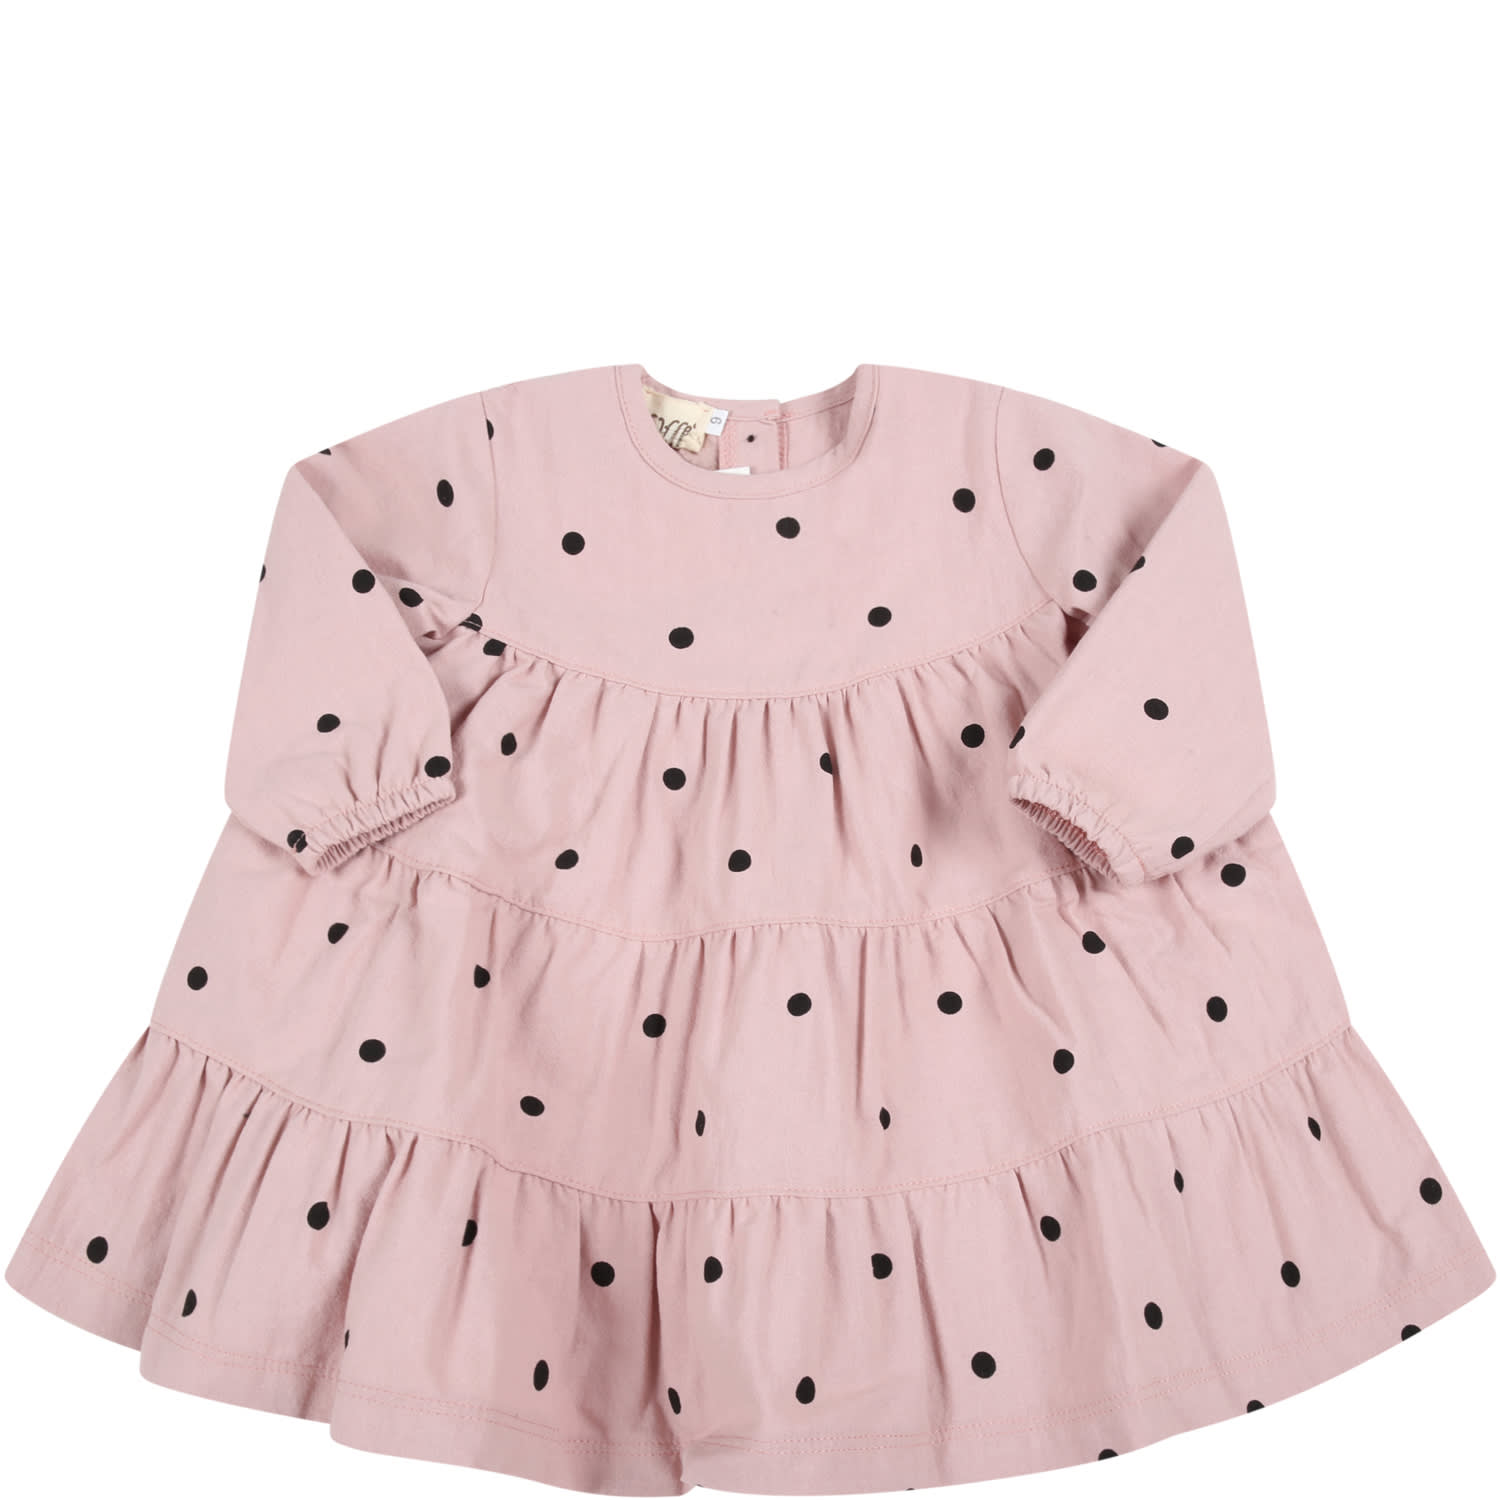 Caffe dOrzo Pink clelia-baby Dress For Baby Girl